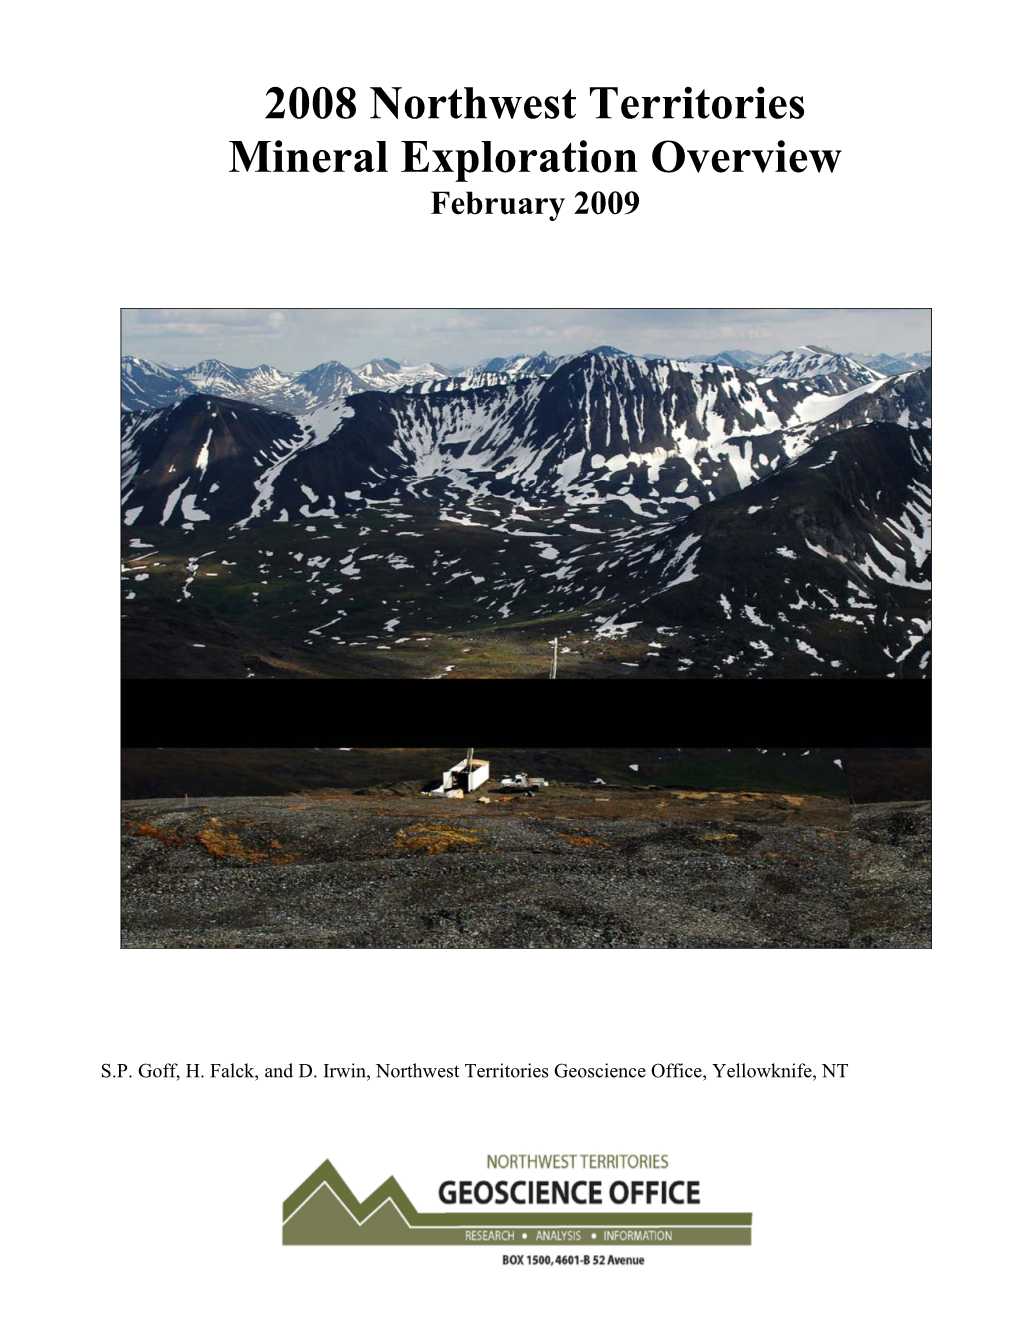 2008 NWT Mineral Exploration Overview, February 2009 3 2008 Northwest Territories Mineral Exploration Overview